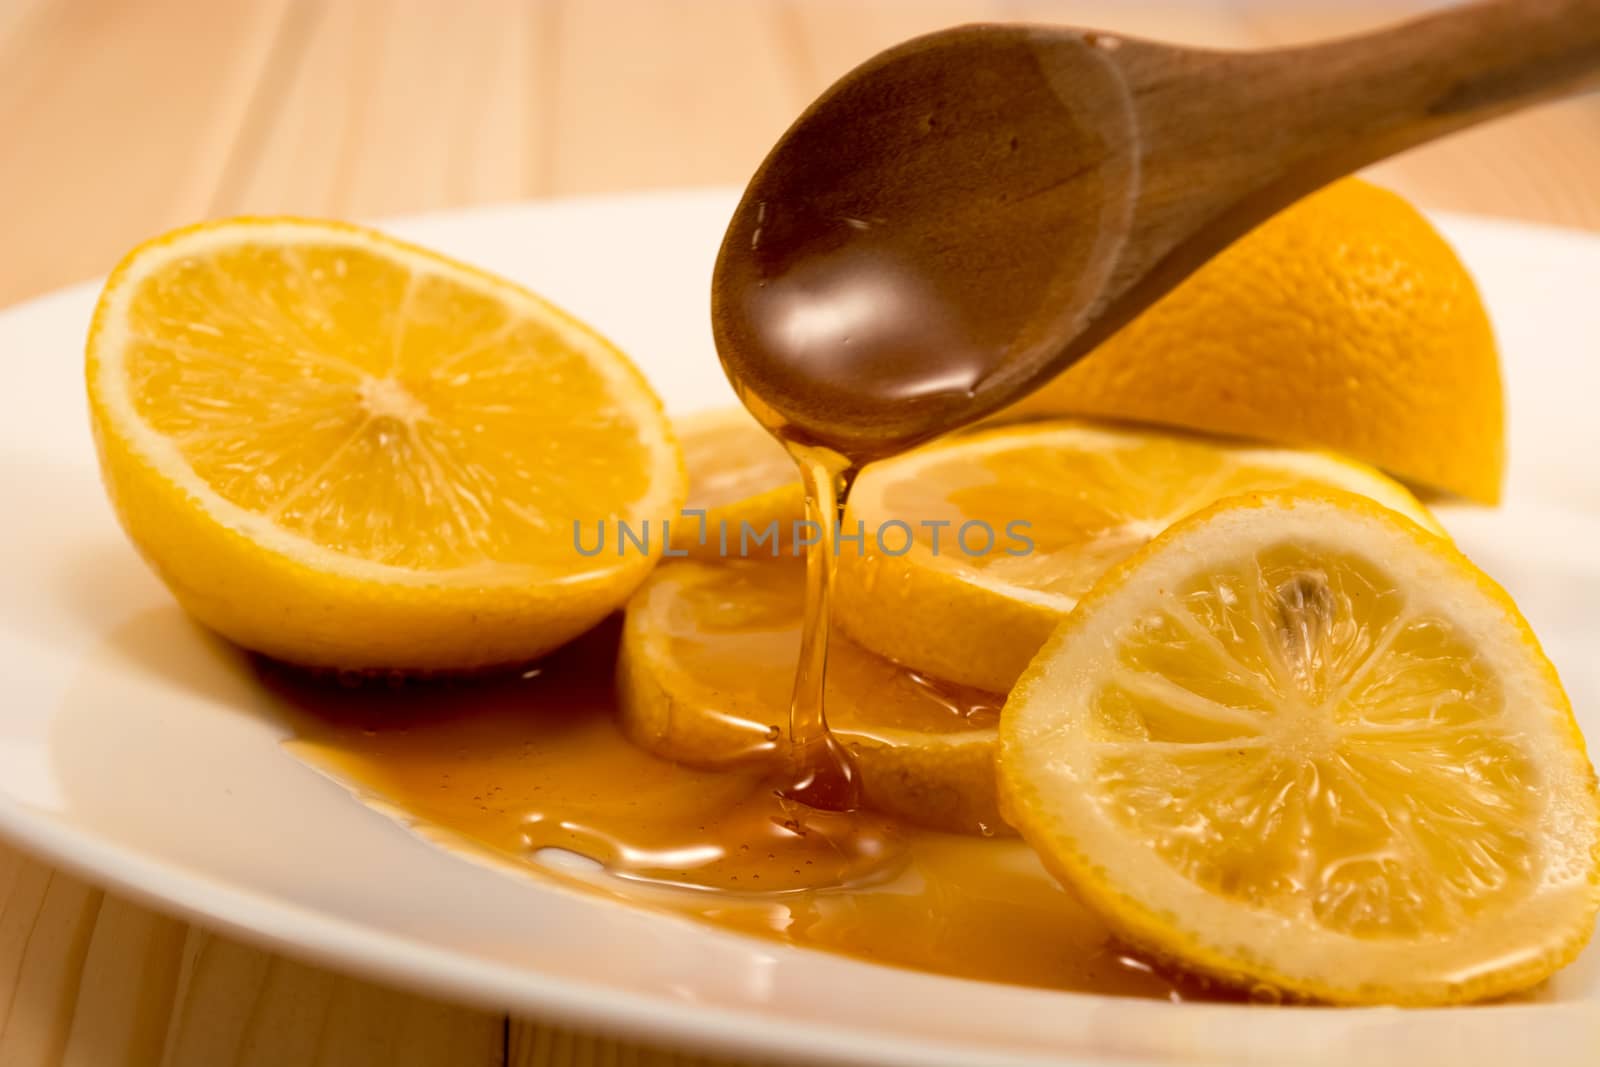 Closeup of sliced lemon and wooden spoon with honey on a plate